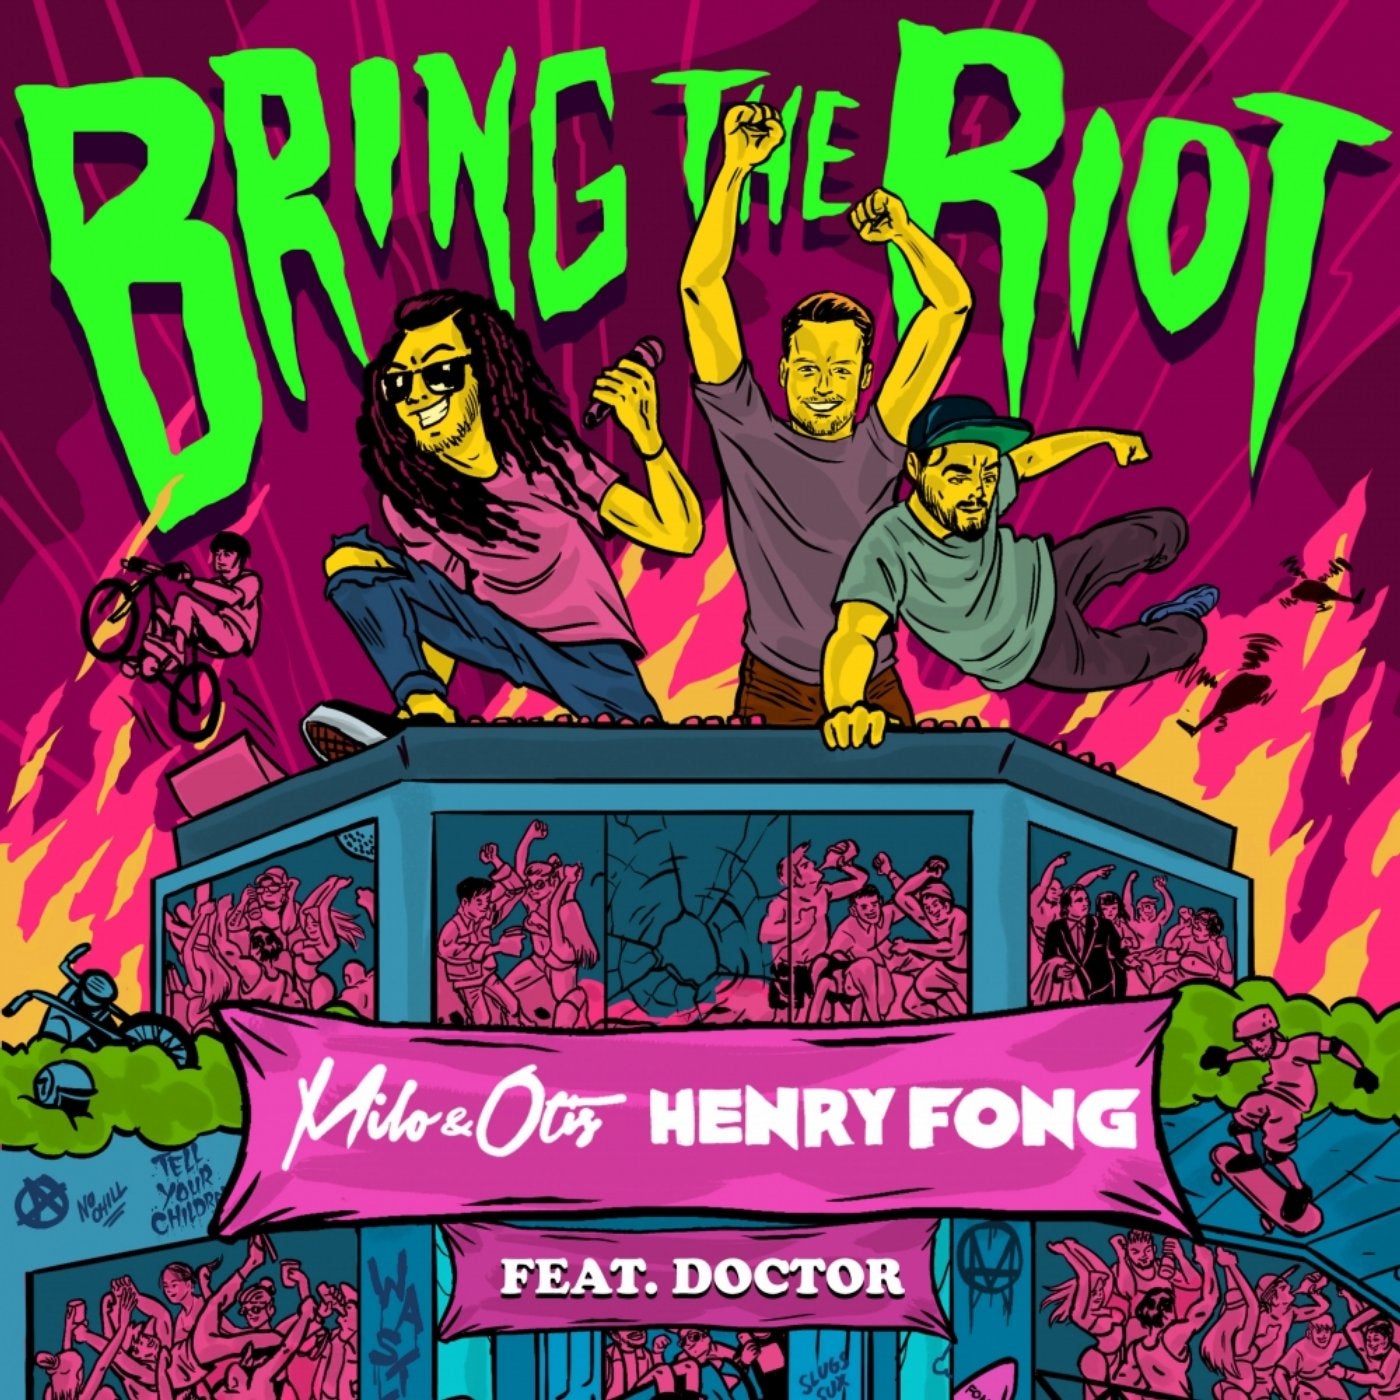 Bring The Riot